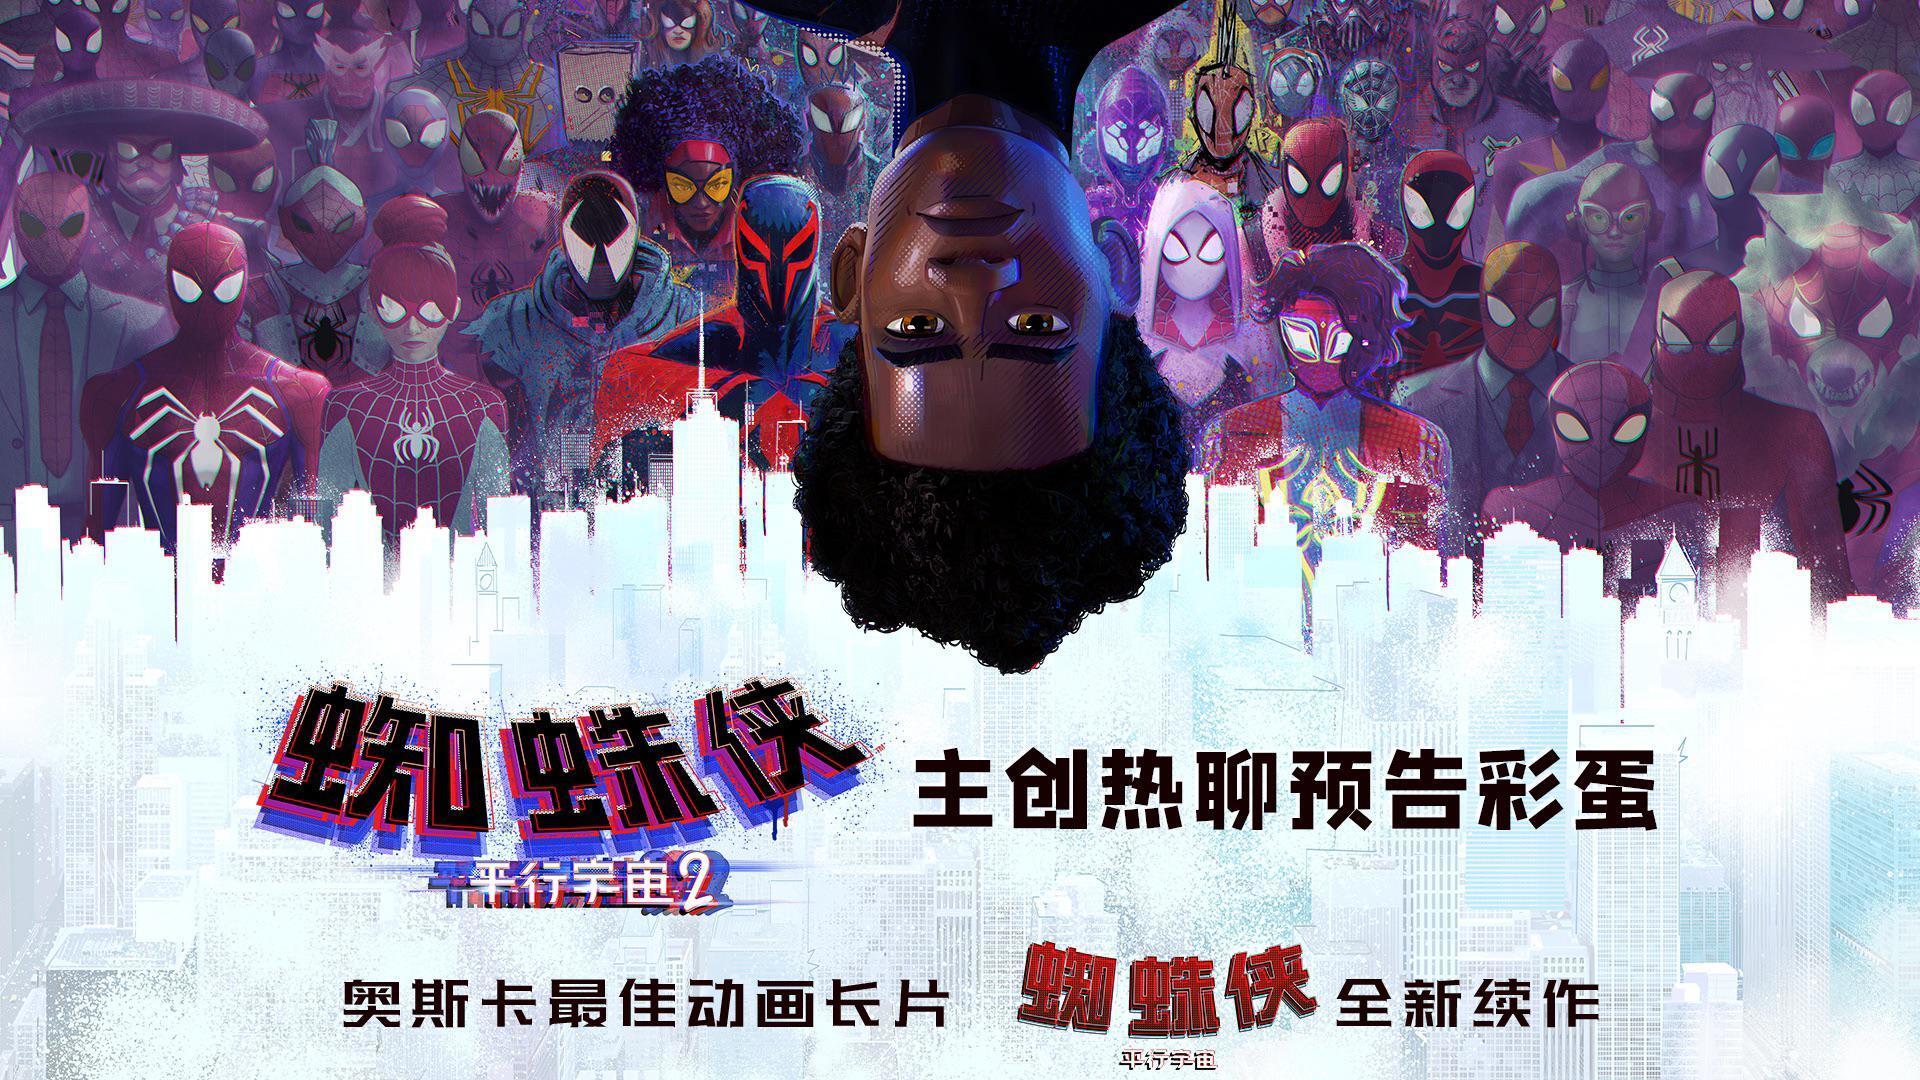 Spider-Man: Across the Spider-Verse International Poster Adds Even More  Spider Heroes